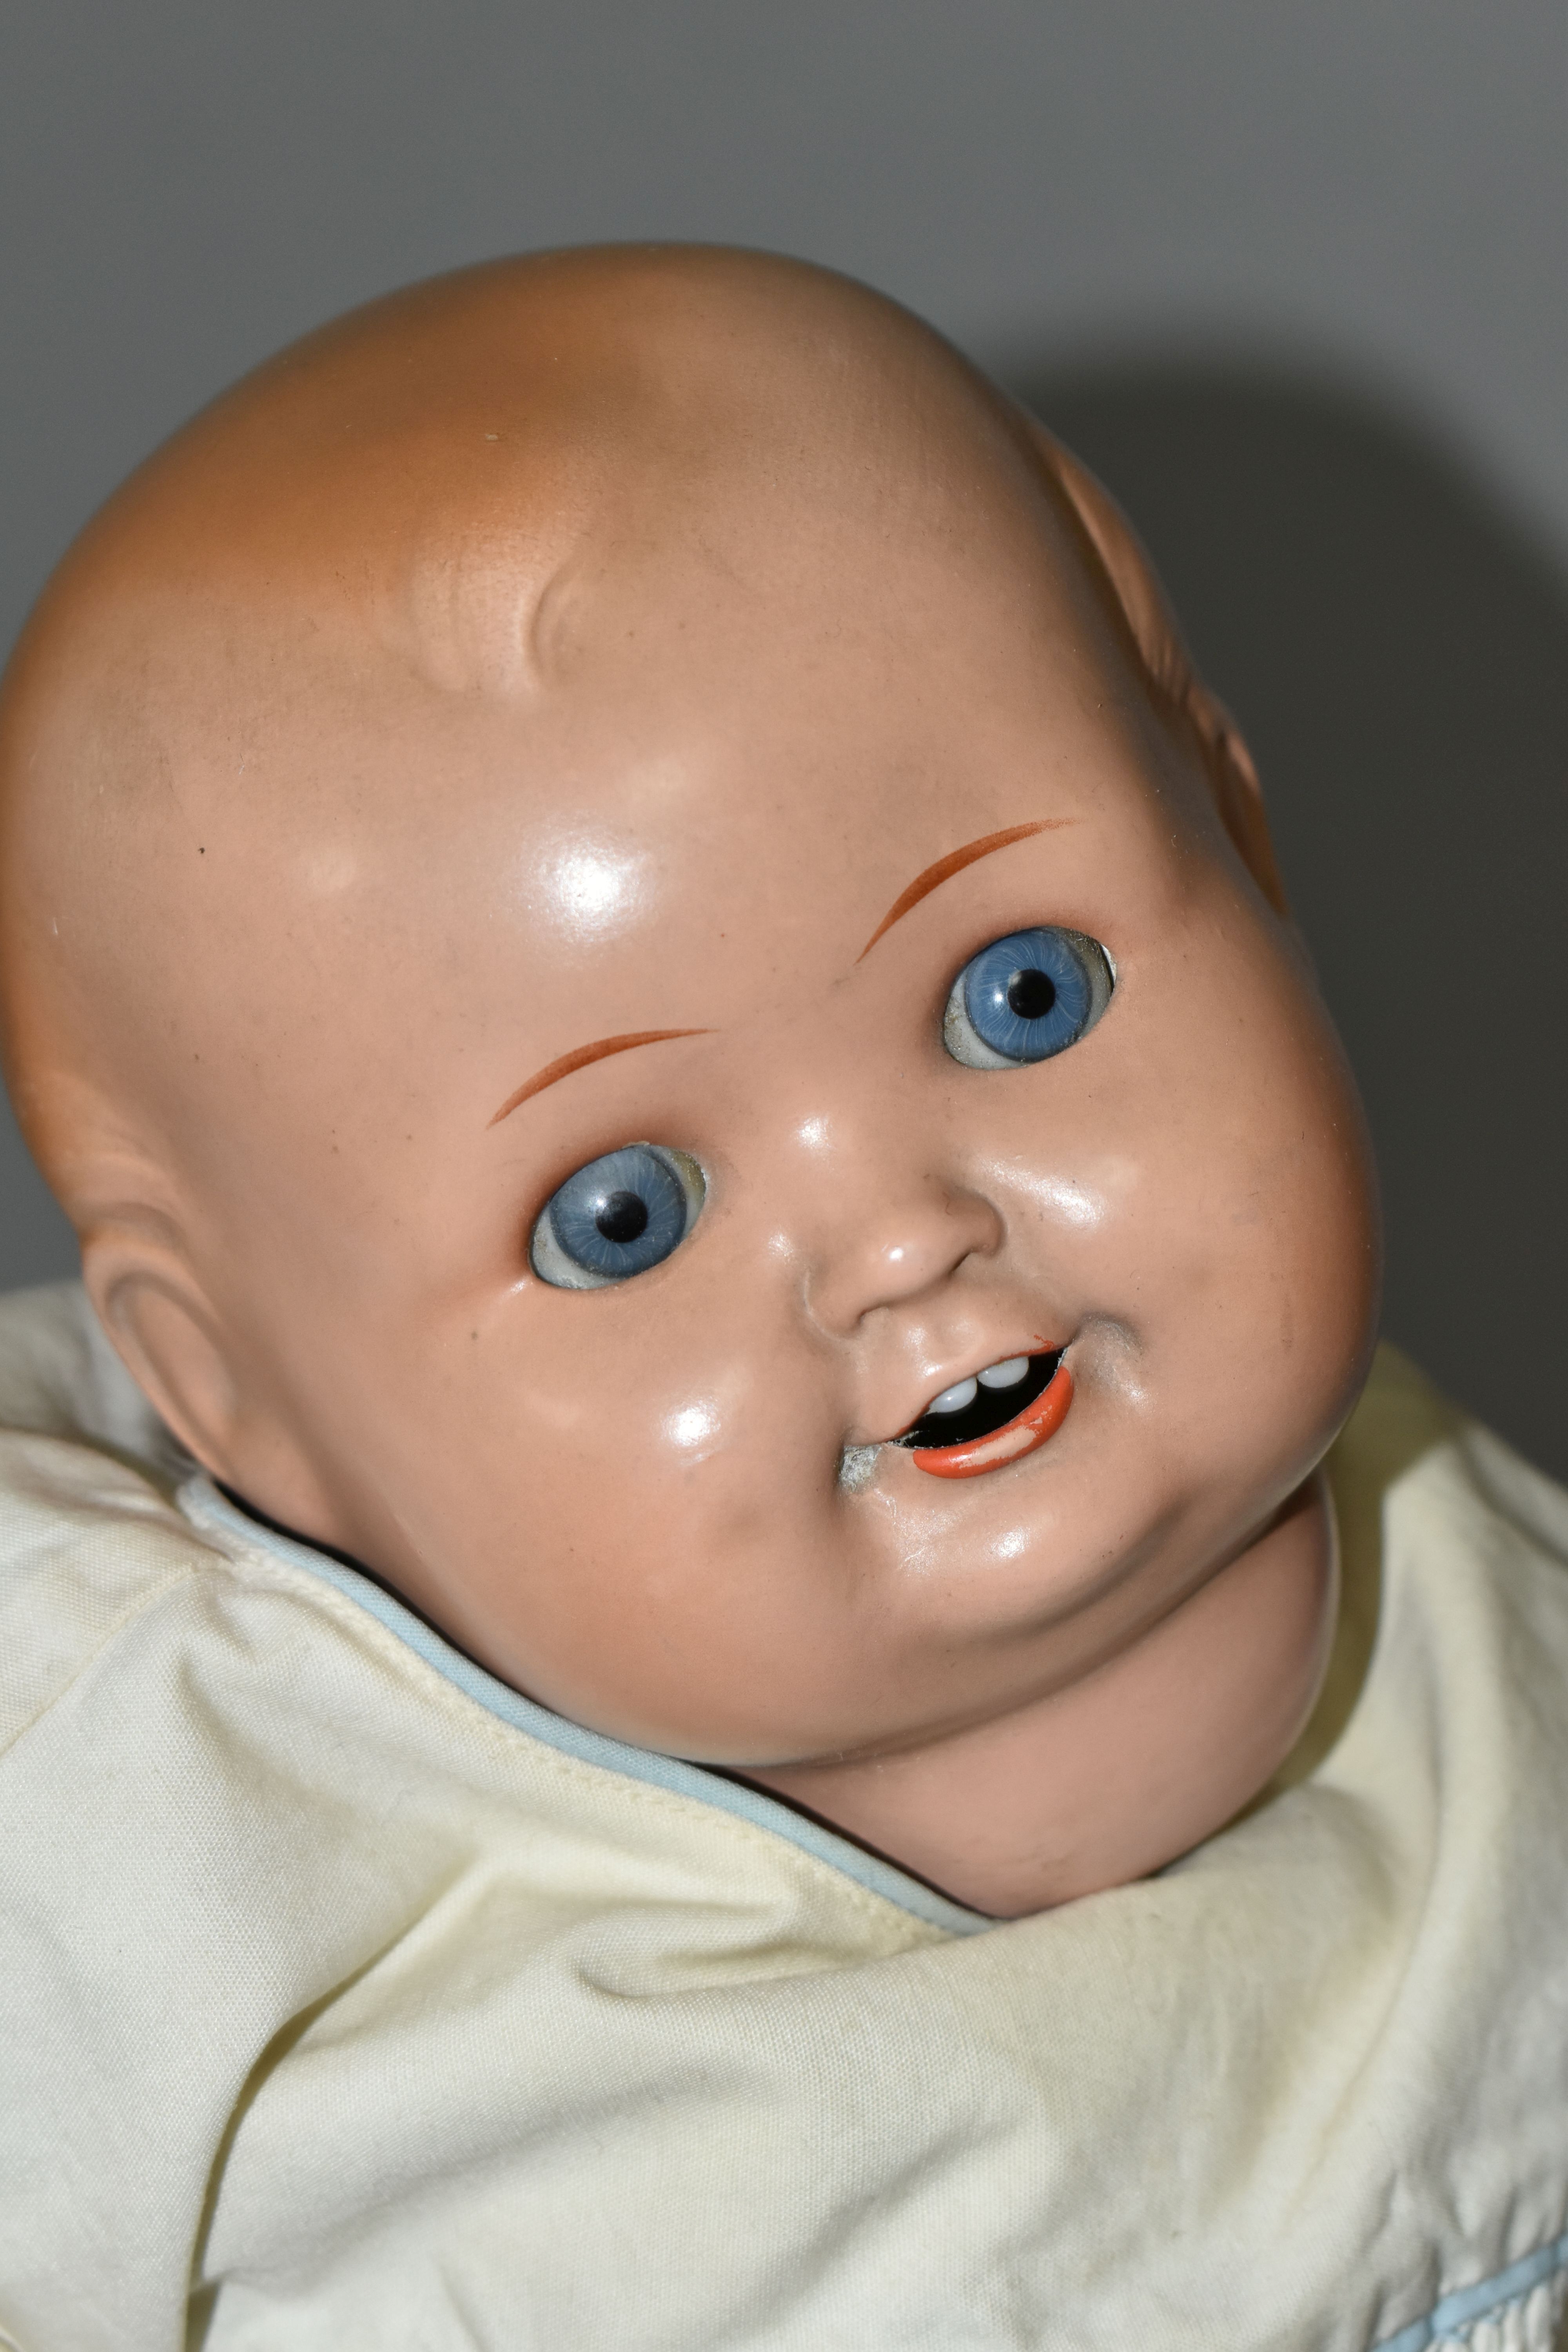 A HUGO WIEGARD DOLL, with bisque head, closing eyes, an open mouth showing two teeth, composite body - Image 2 of 7